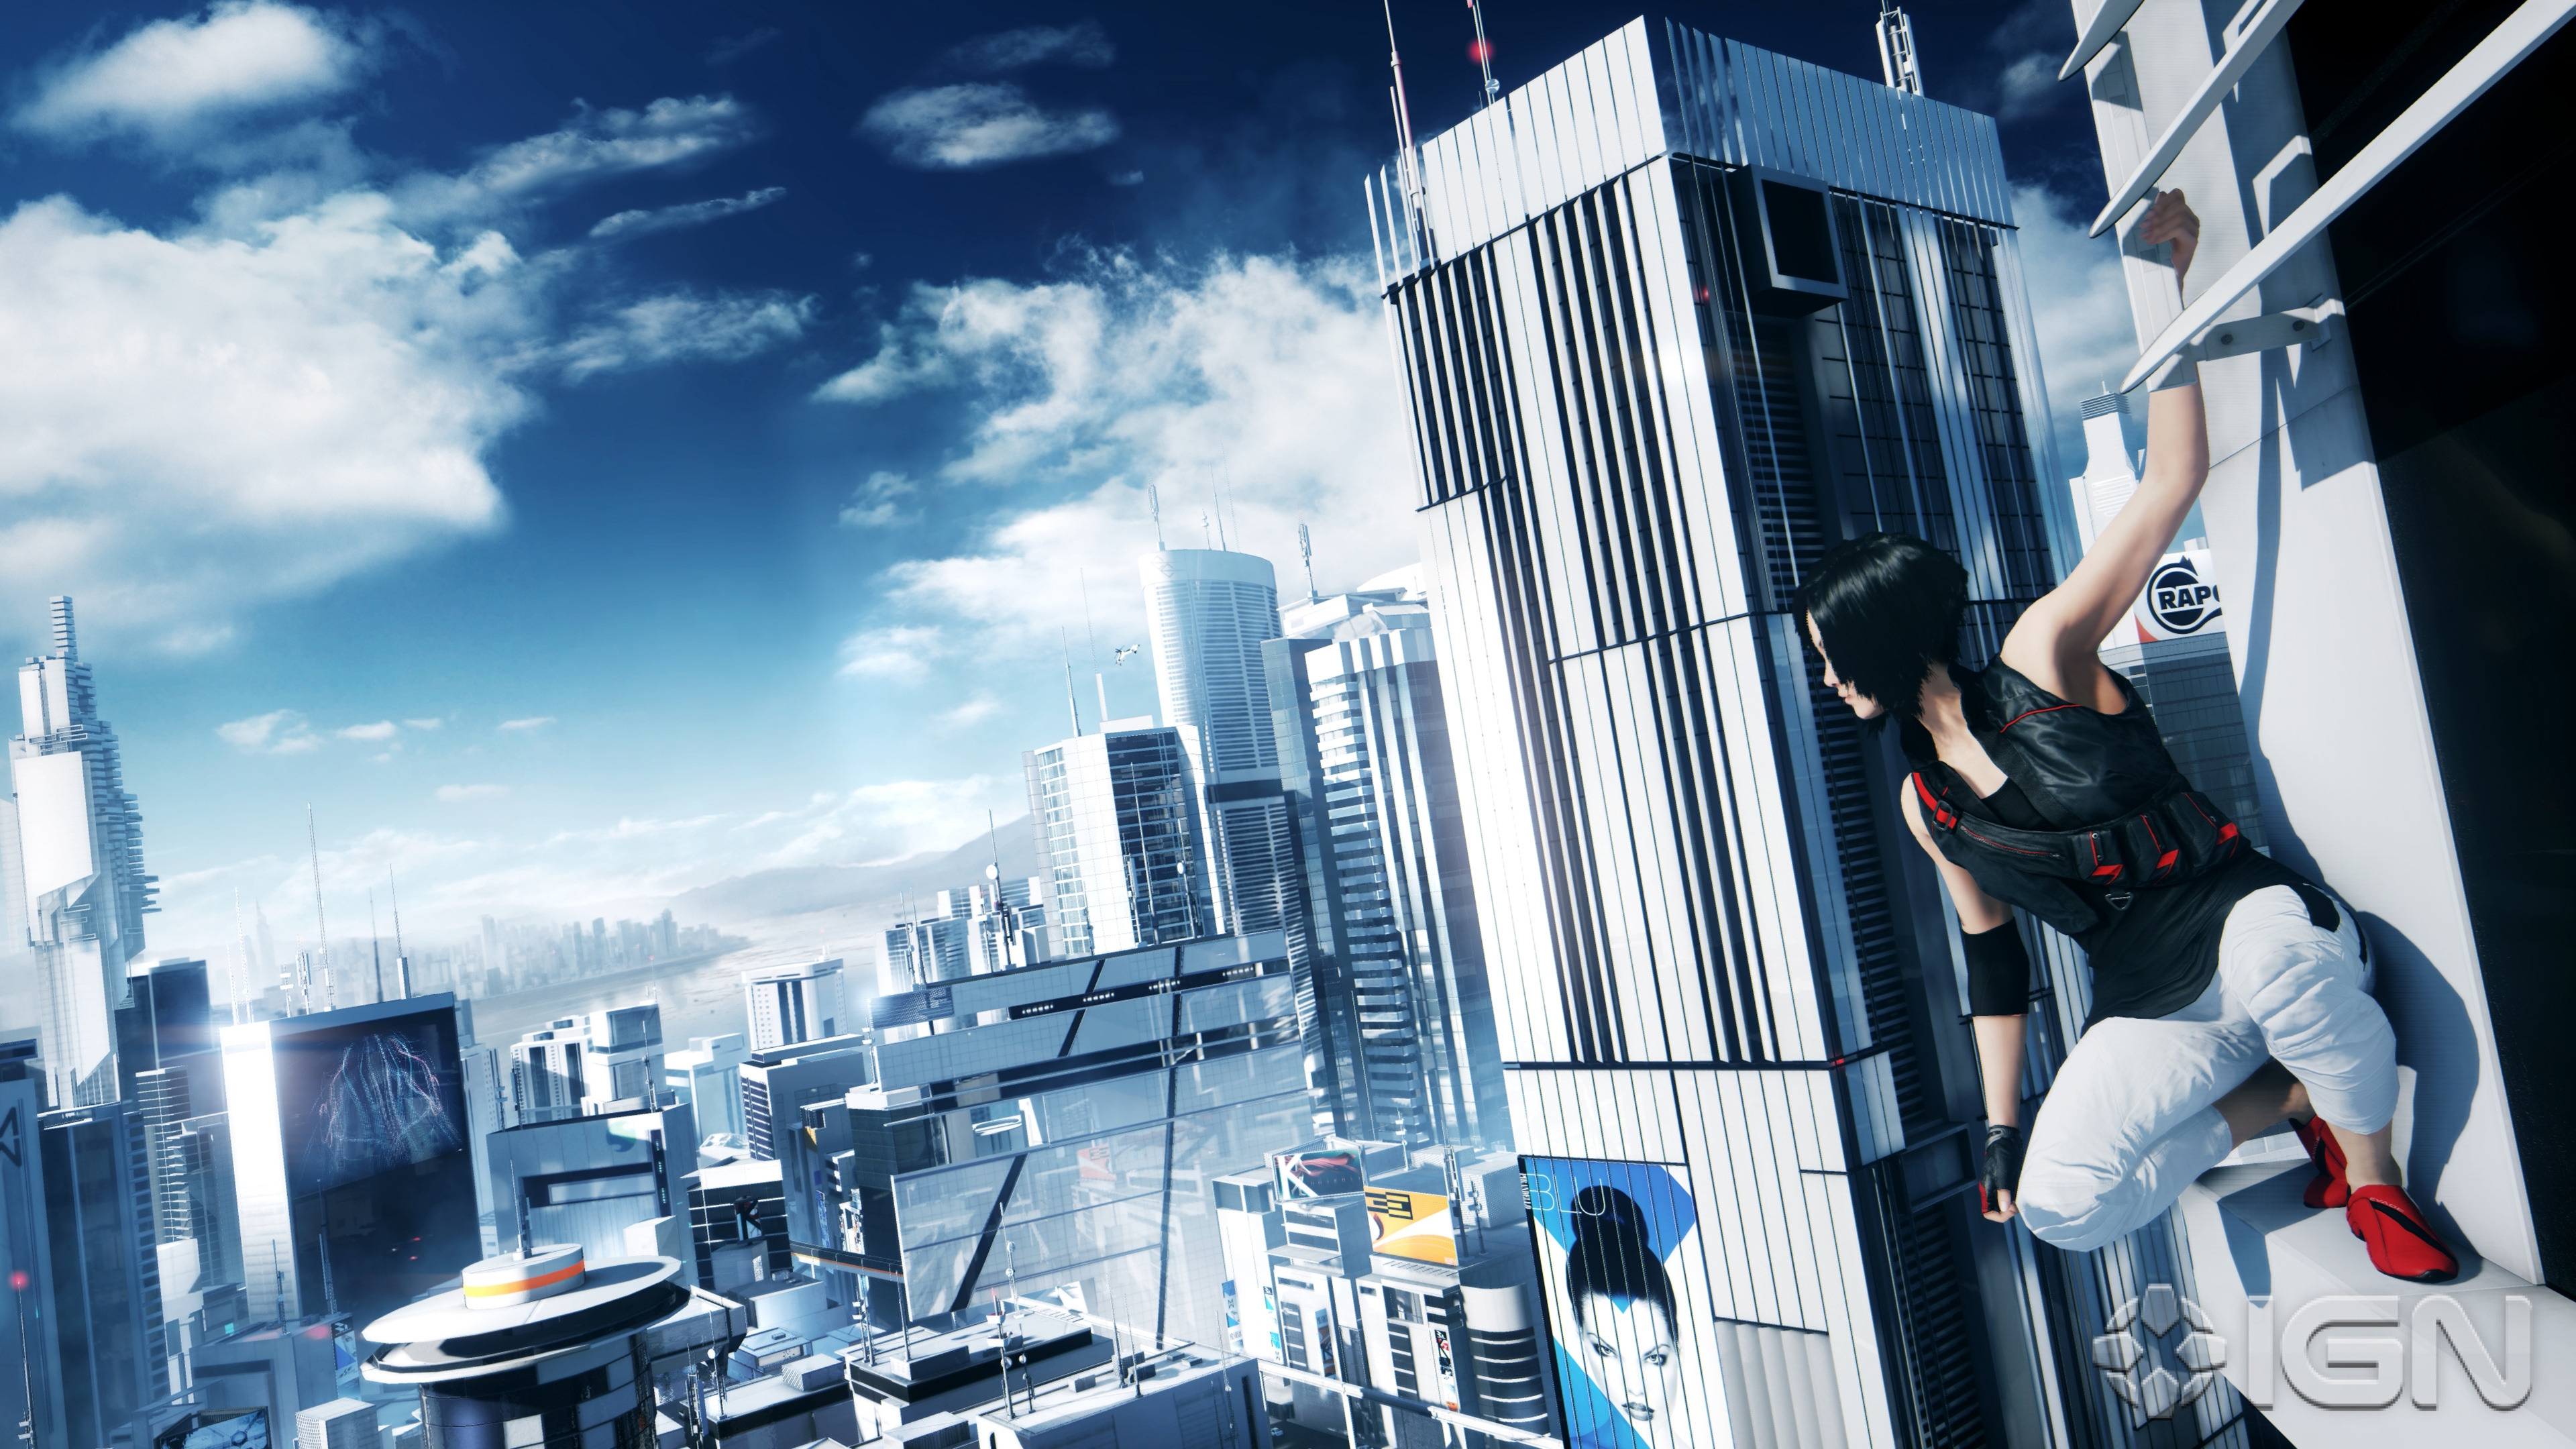 Mirrors Edge 2 for 3840 x 2160 Ultra HD resolution